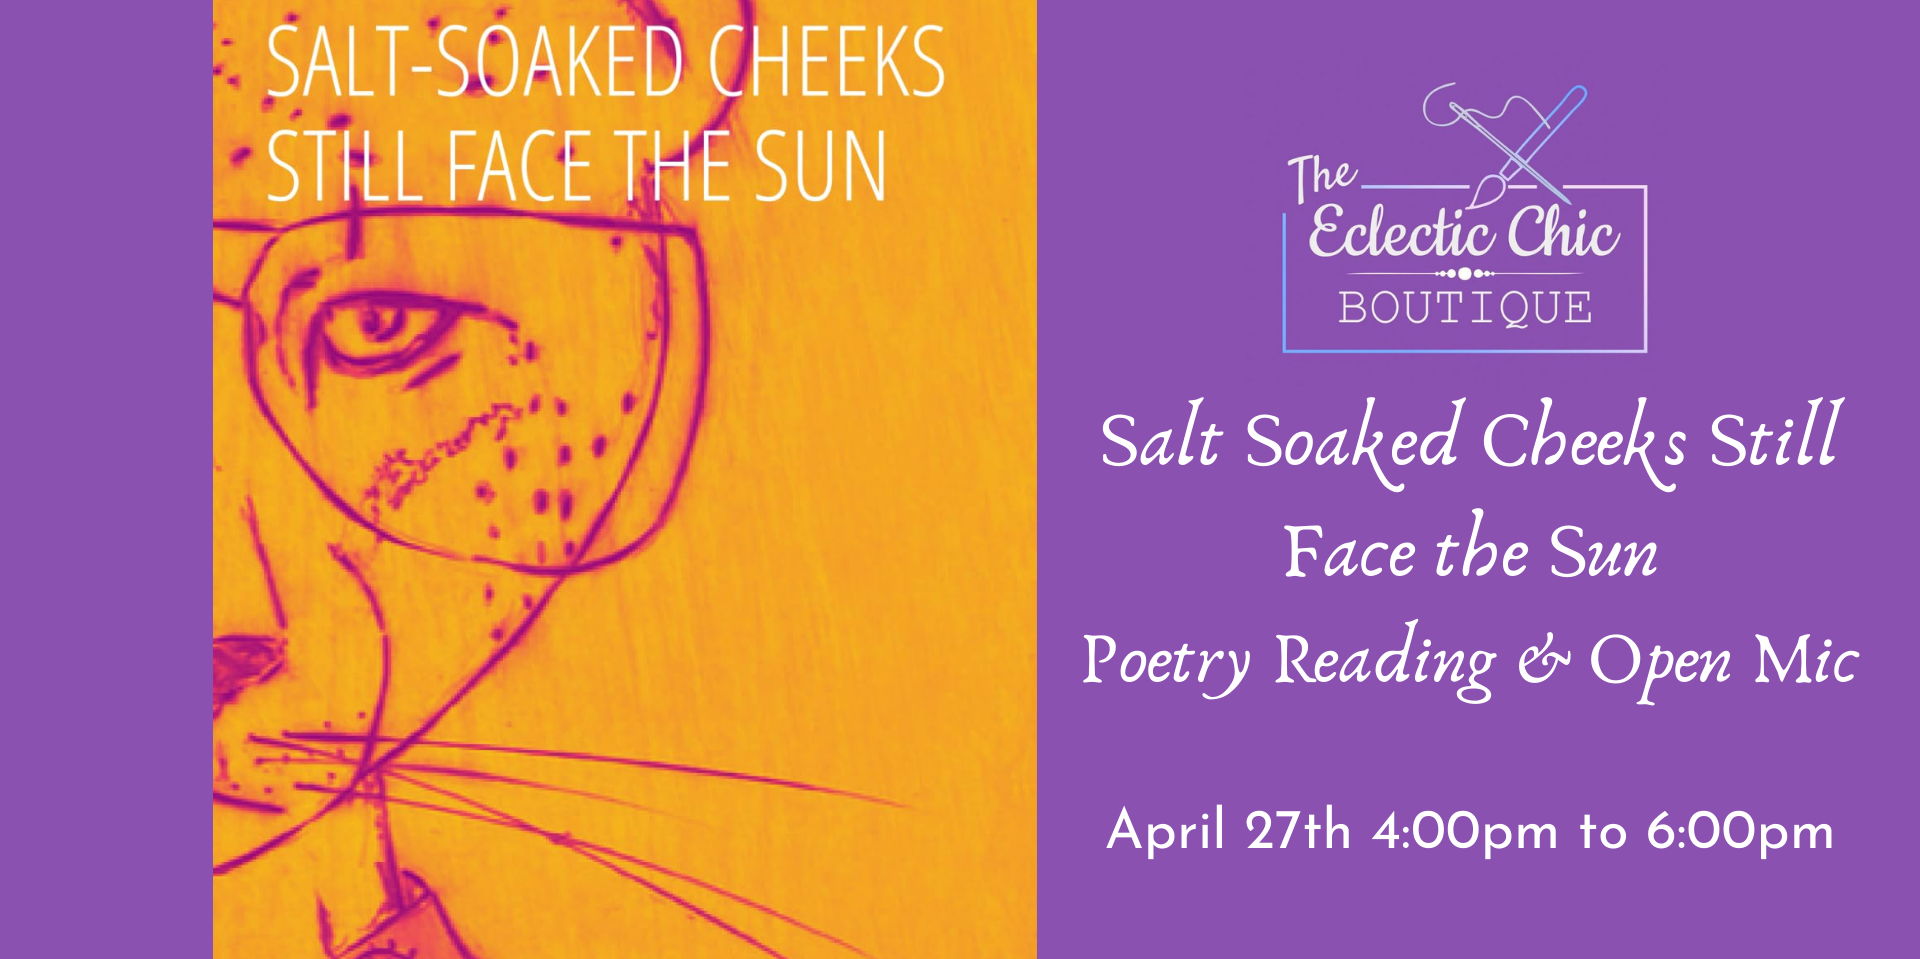 Salt Soaked Cheeks Still Face the Sun - Poetry Reading & Open Mic promotional image